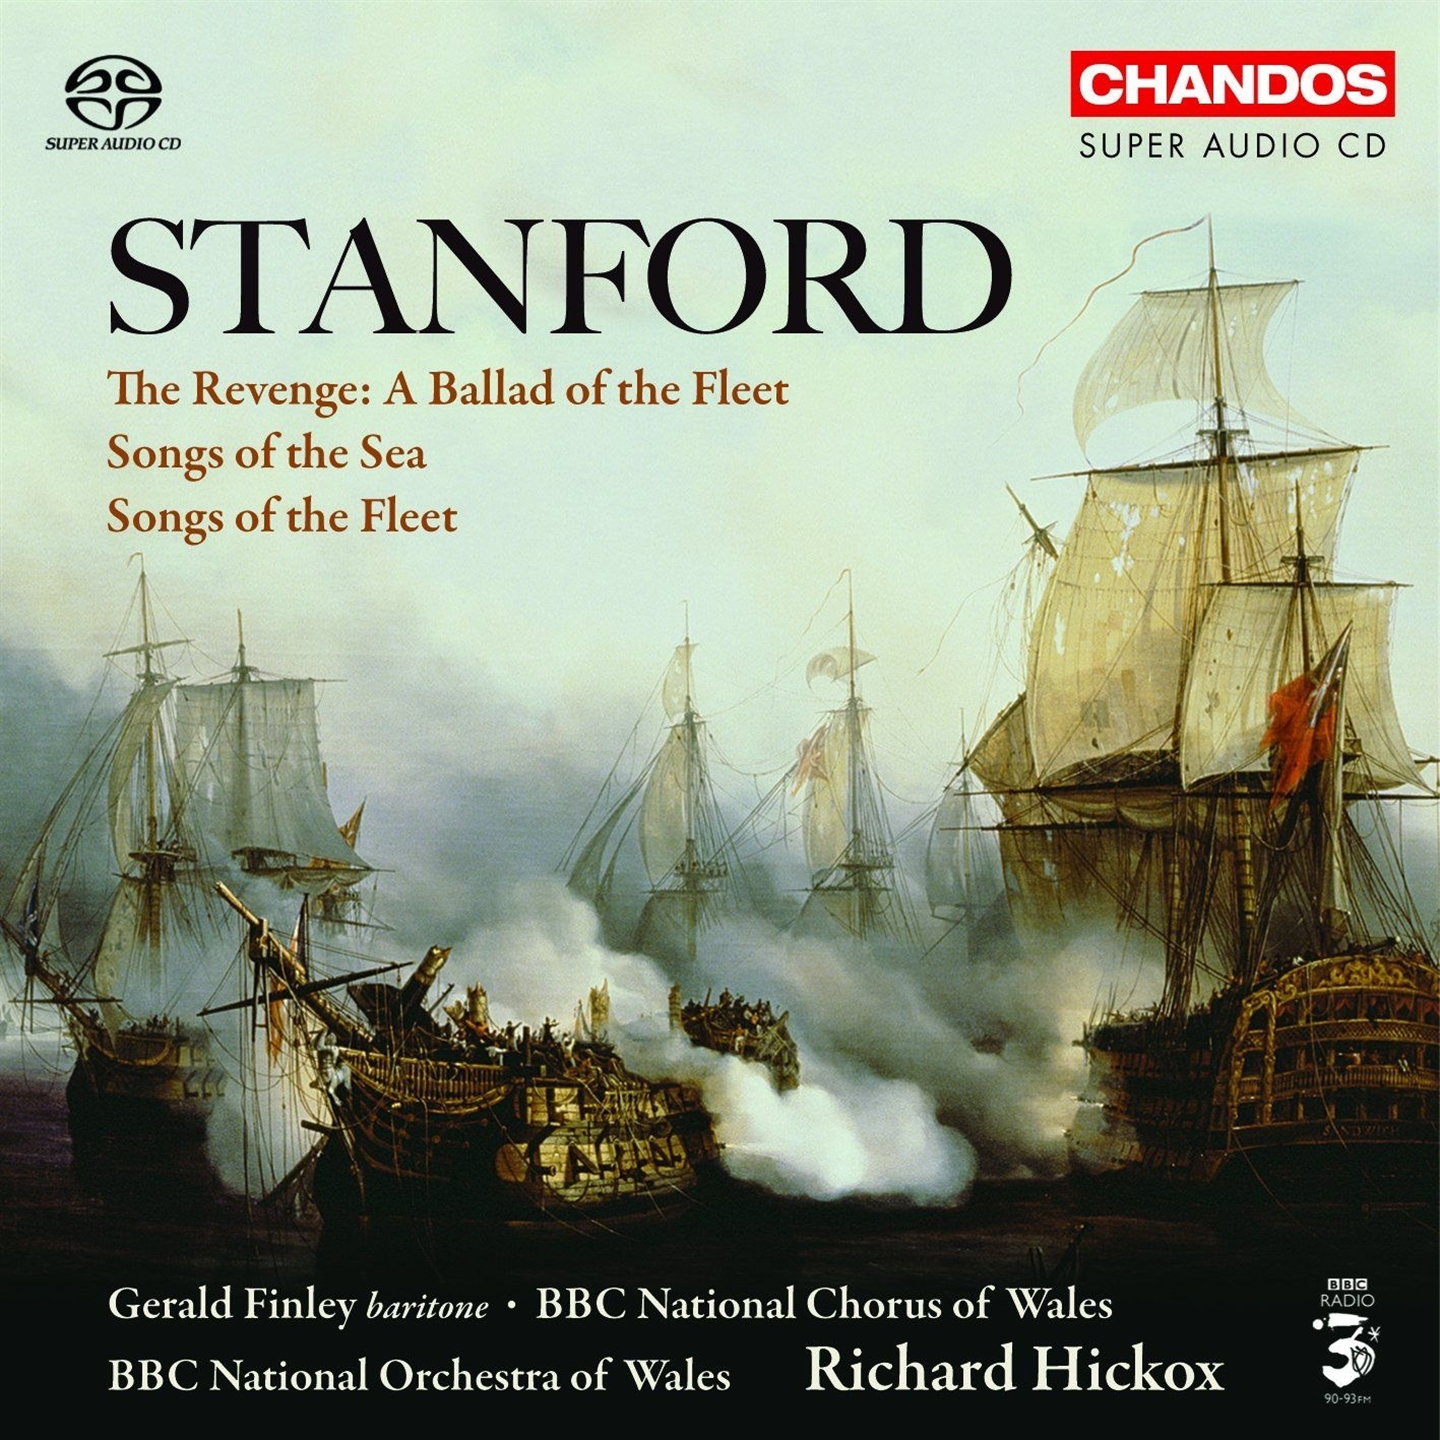 STANFORD: SONGS OF THE SEA